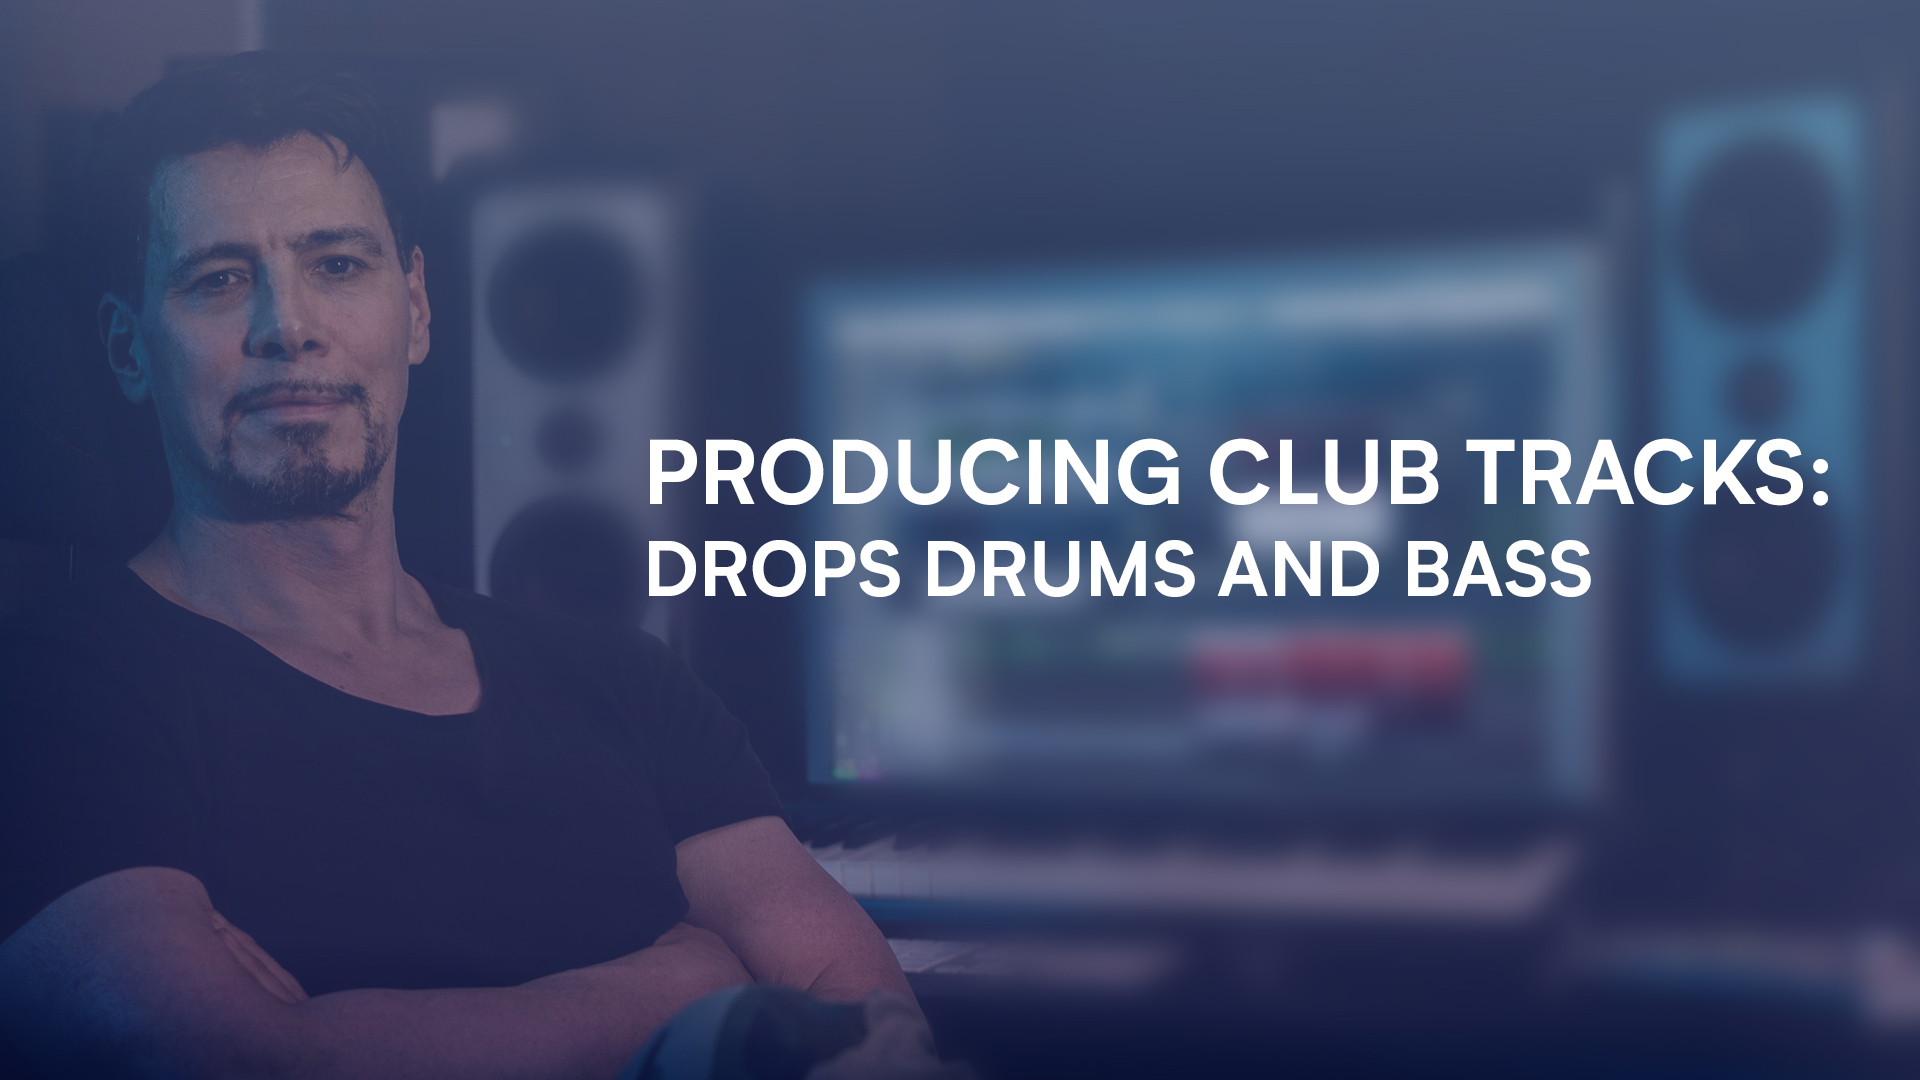 Drop Drums and Bass